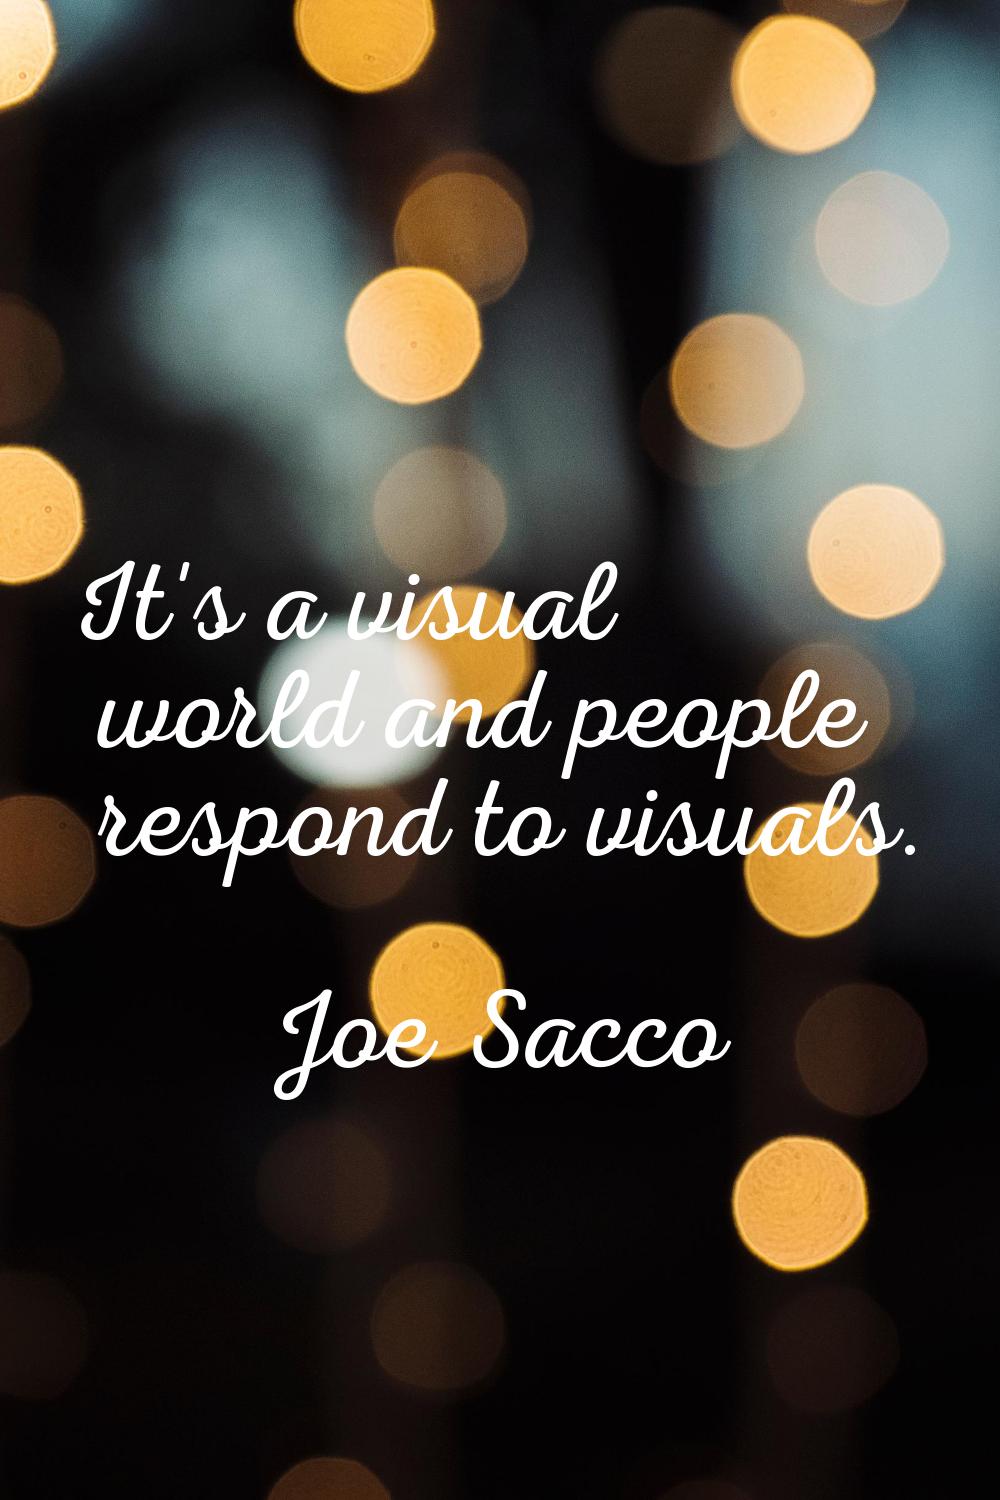 It's a visual world and people respond to visuals.